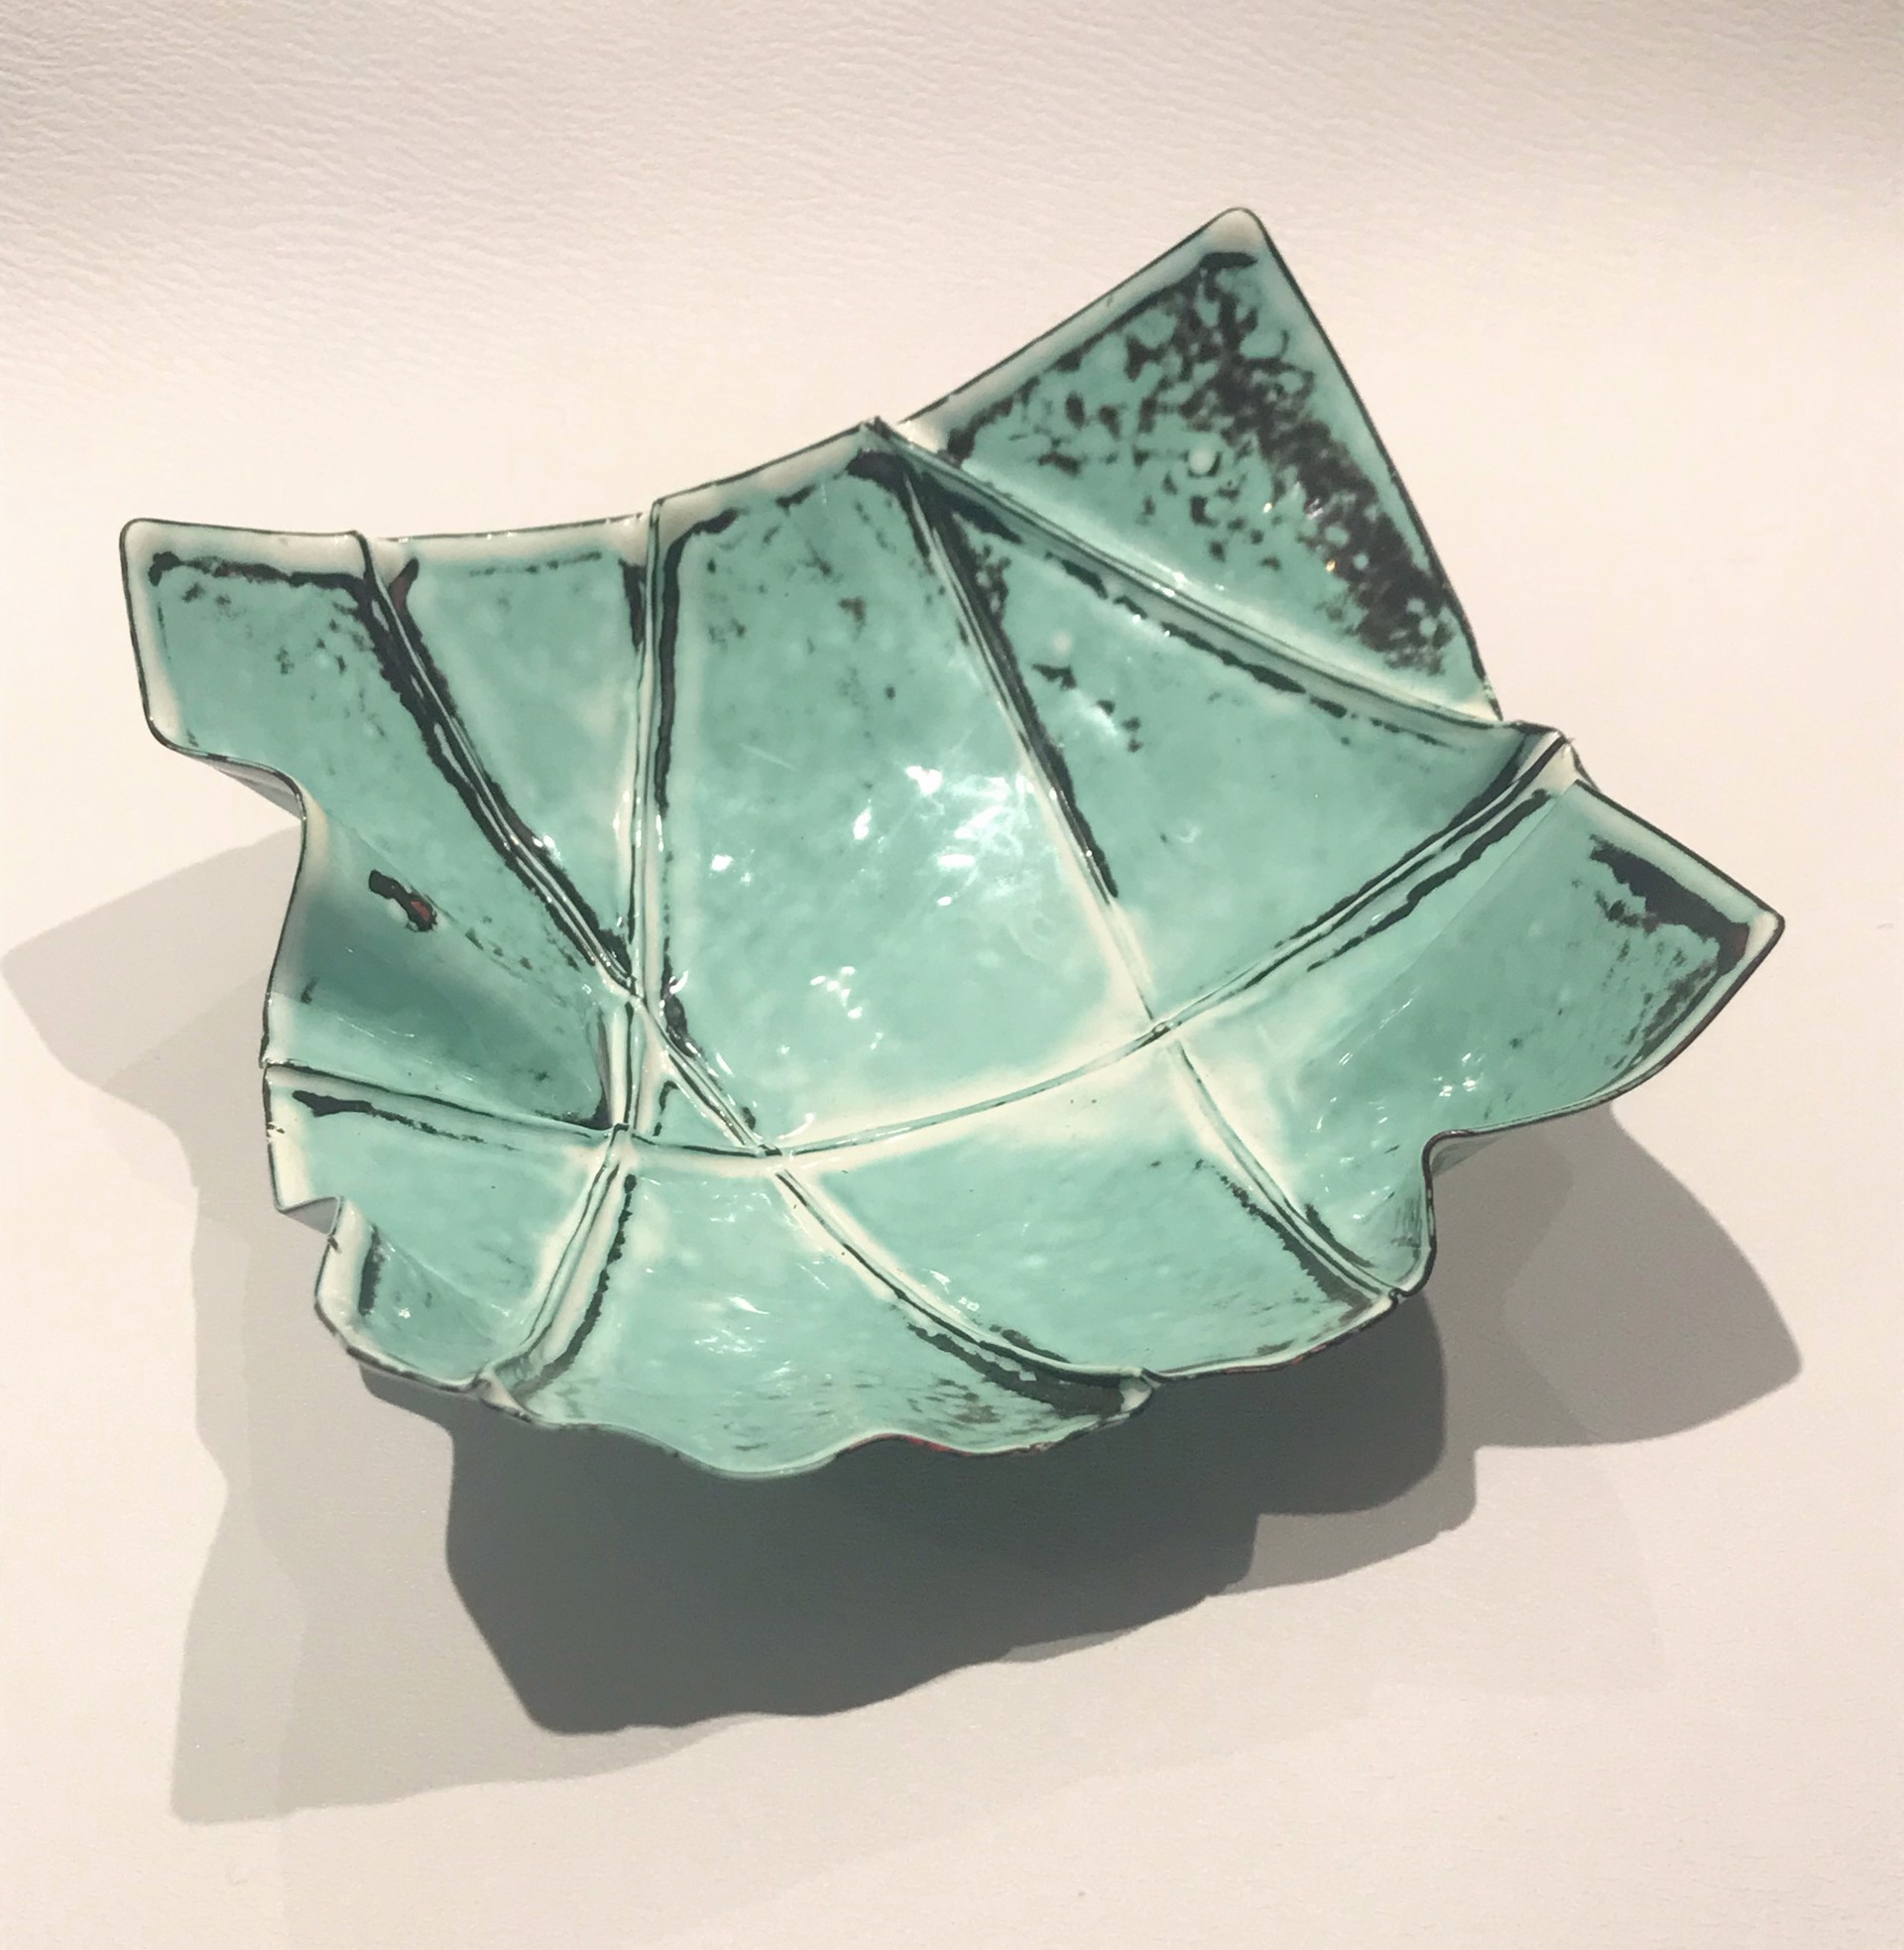 "Square Enameled Bowl with Folds" by Nicole Josette